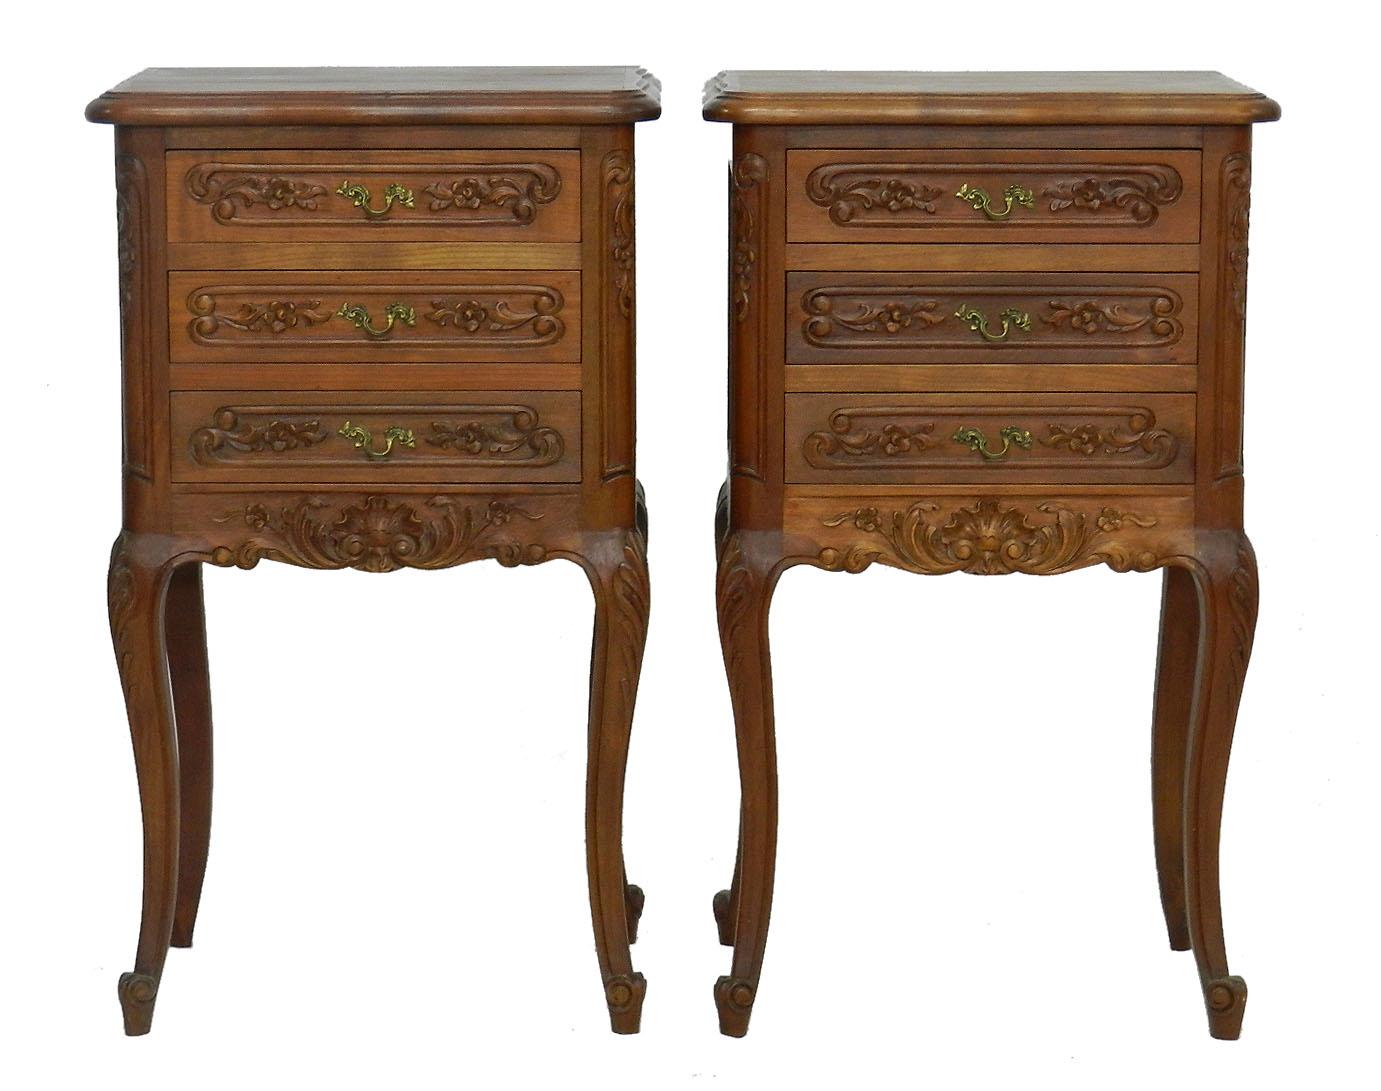 Pair of nightstands French side cabinets bedside tables, 20th century Louis revival
Solid and carved oak good quality
20th century Louis revival
Very handsome
Each with 3 drawers with brass handles
Very good condition with only very minor signs